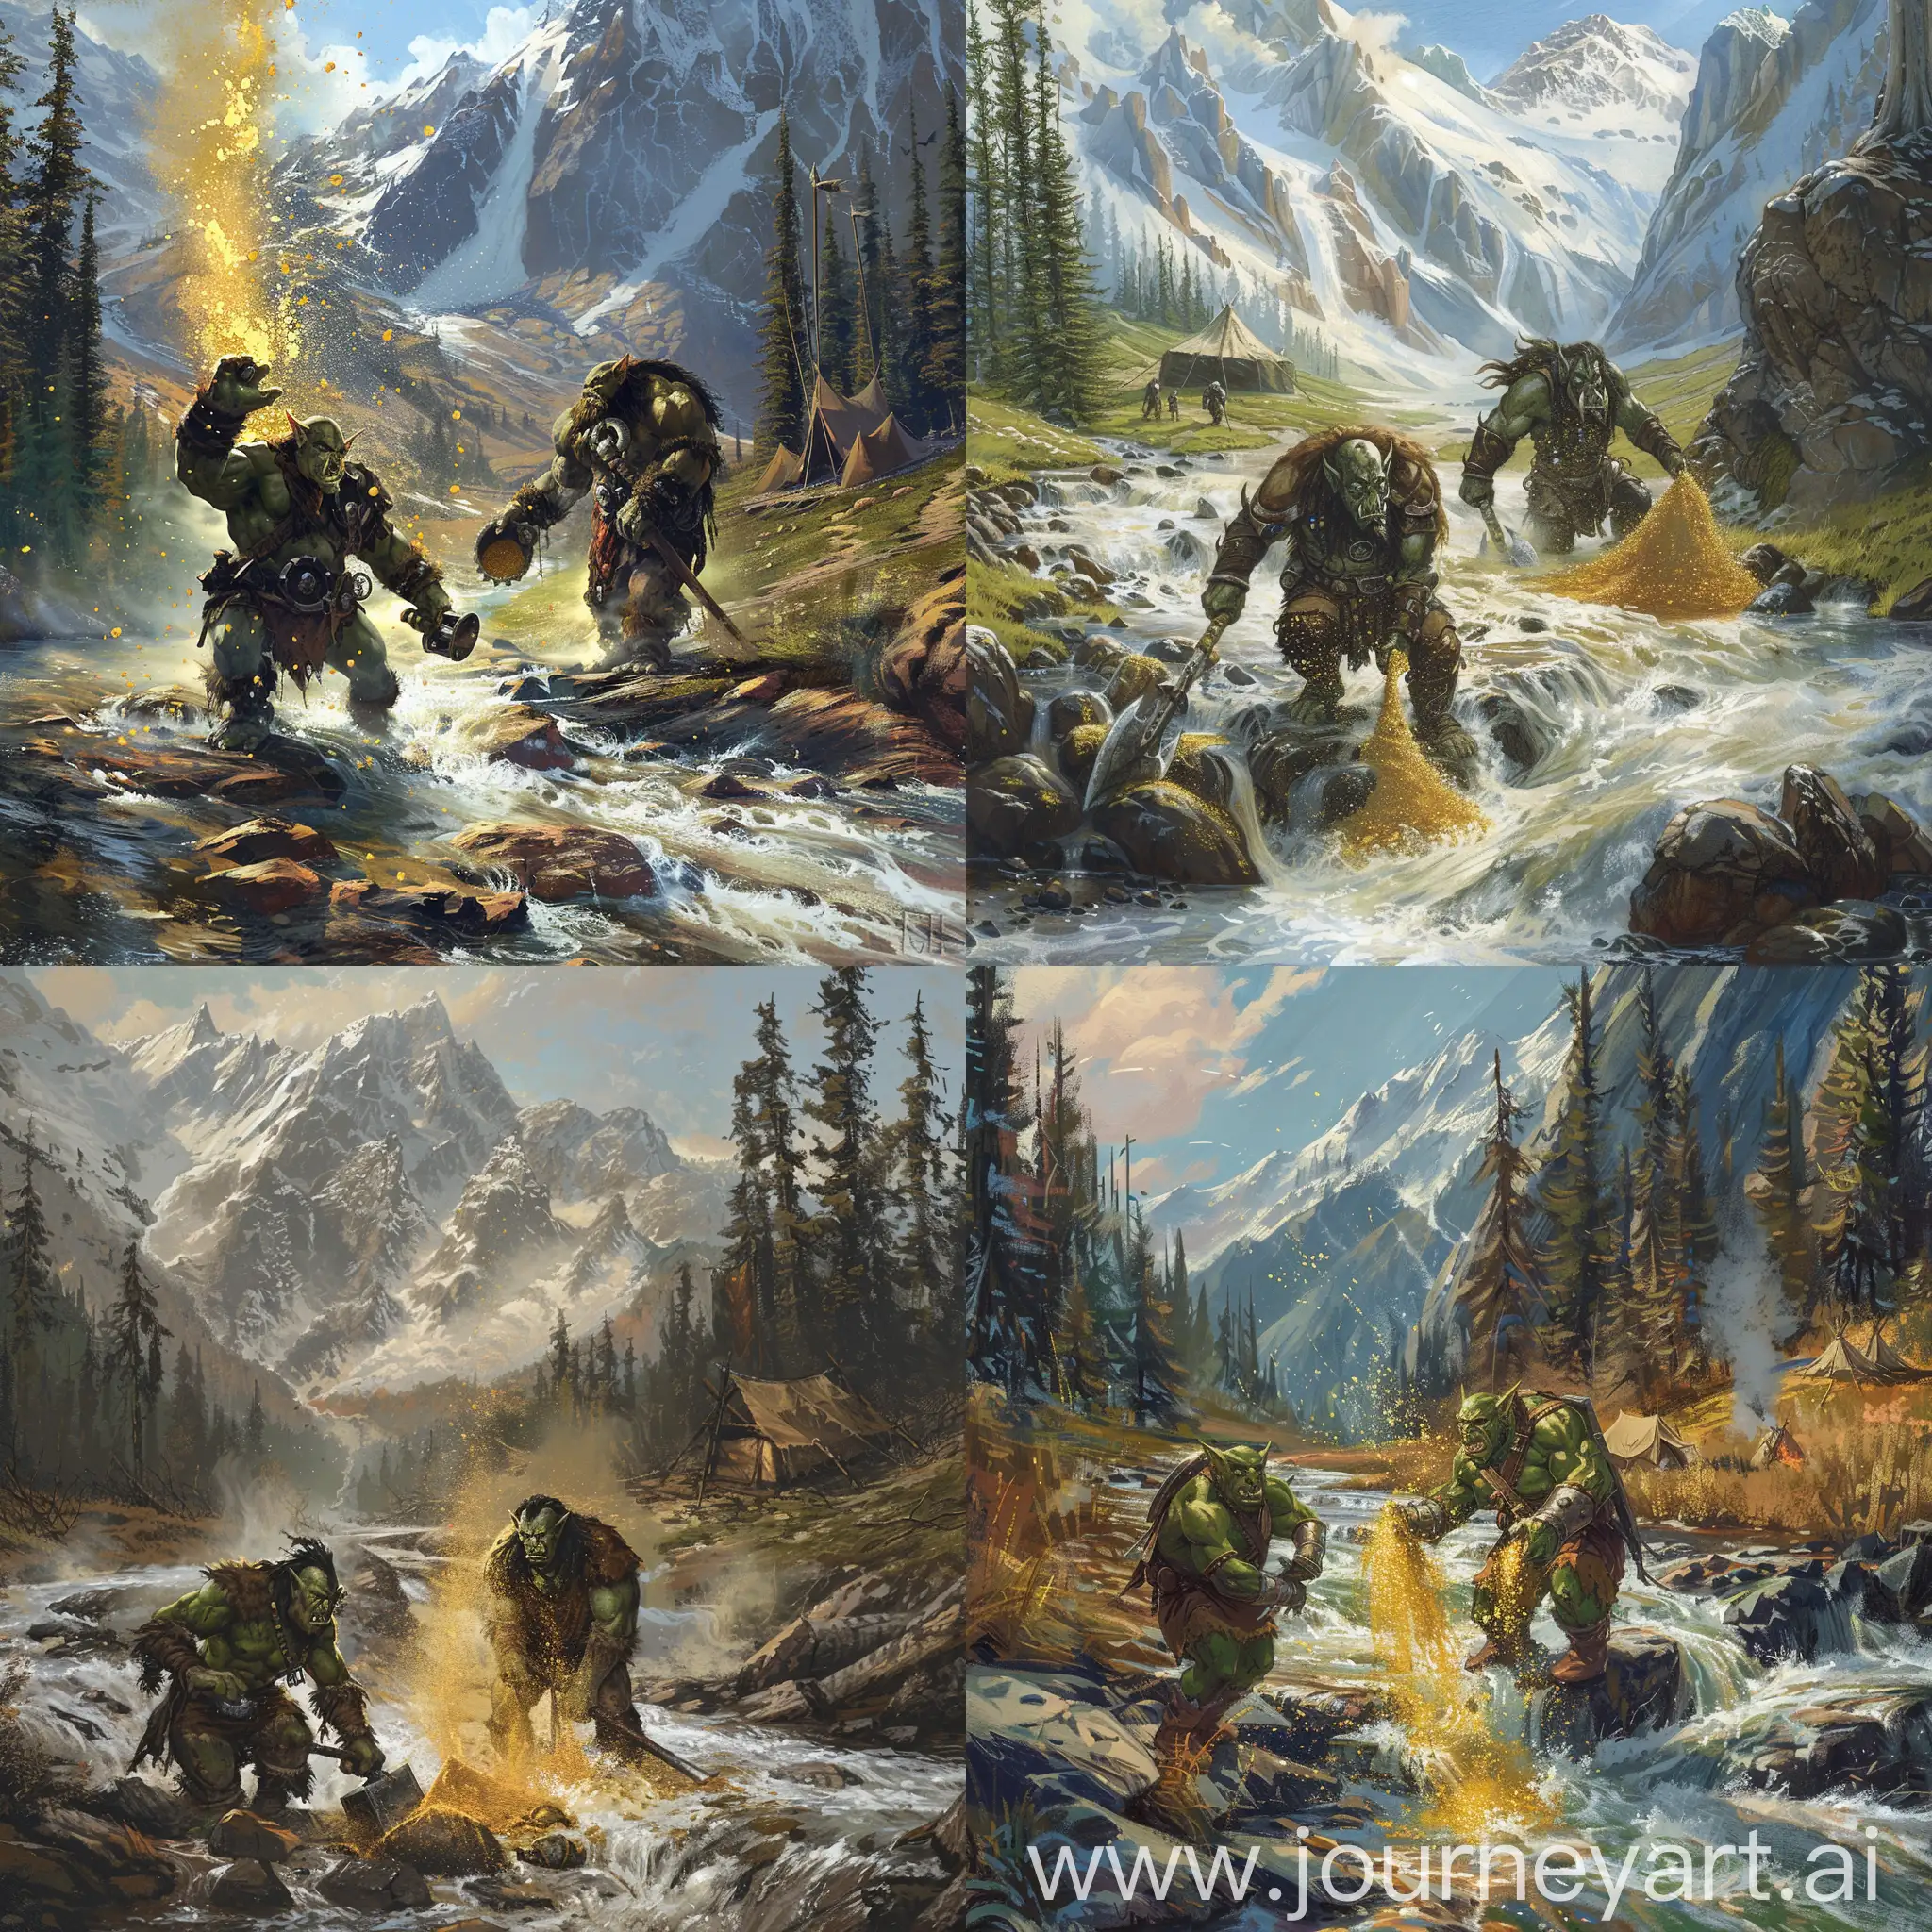 Majestic-Taiga-Scene-Orcs-Mining-Gold-Dust-by-the-River